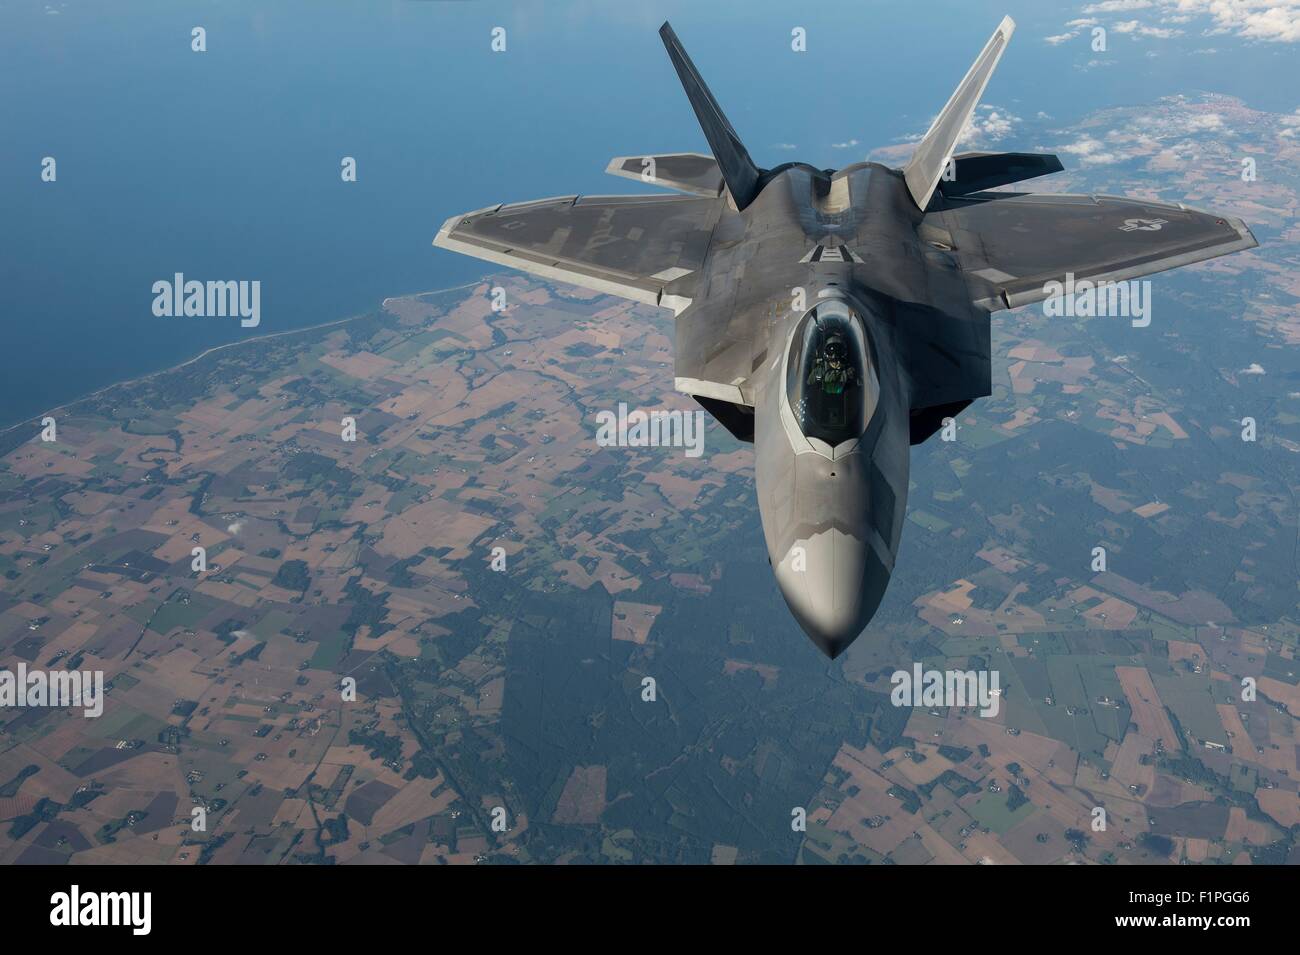 A U.S. Air Force F-22 Raptor stealth fighter aircraft flies in formation over the capital during a forward deployment in support of NATO partners in Europe September 4, 2015 over Tallinn, Estonia. Stock Photo